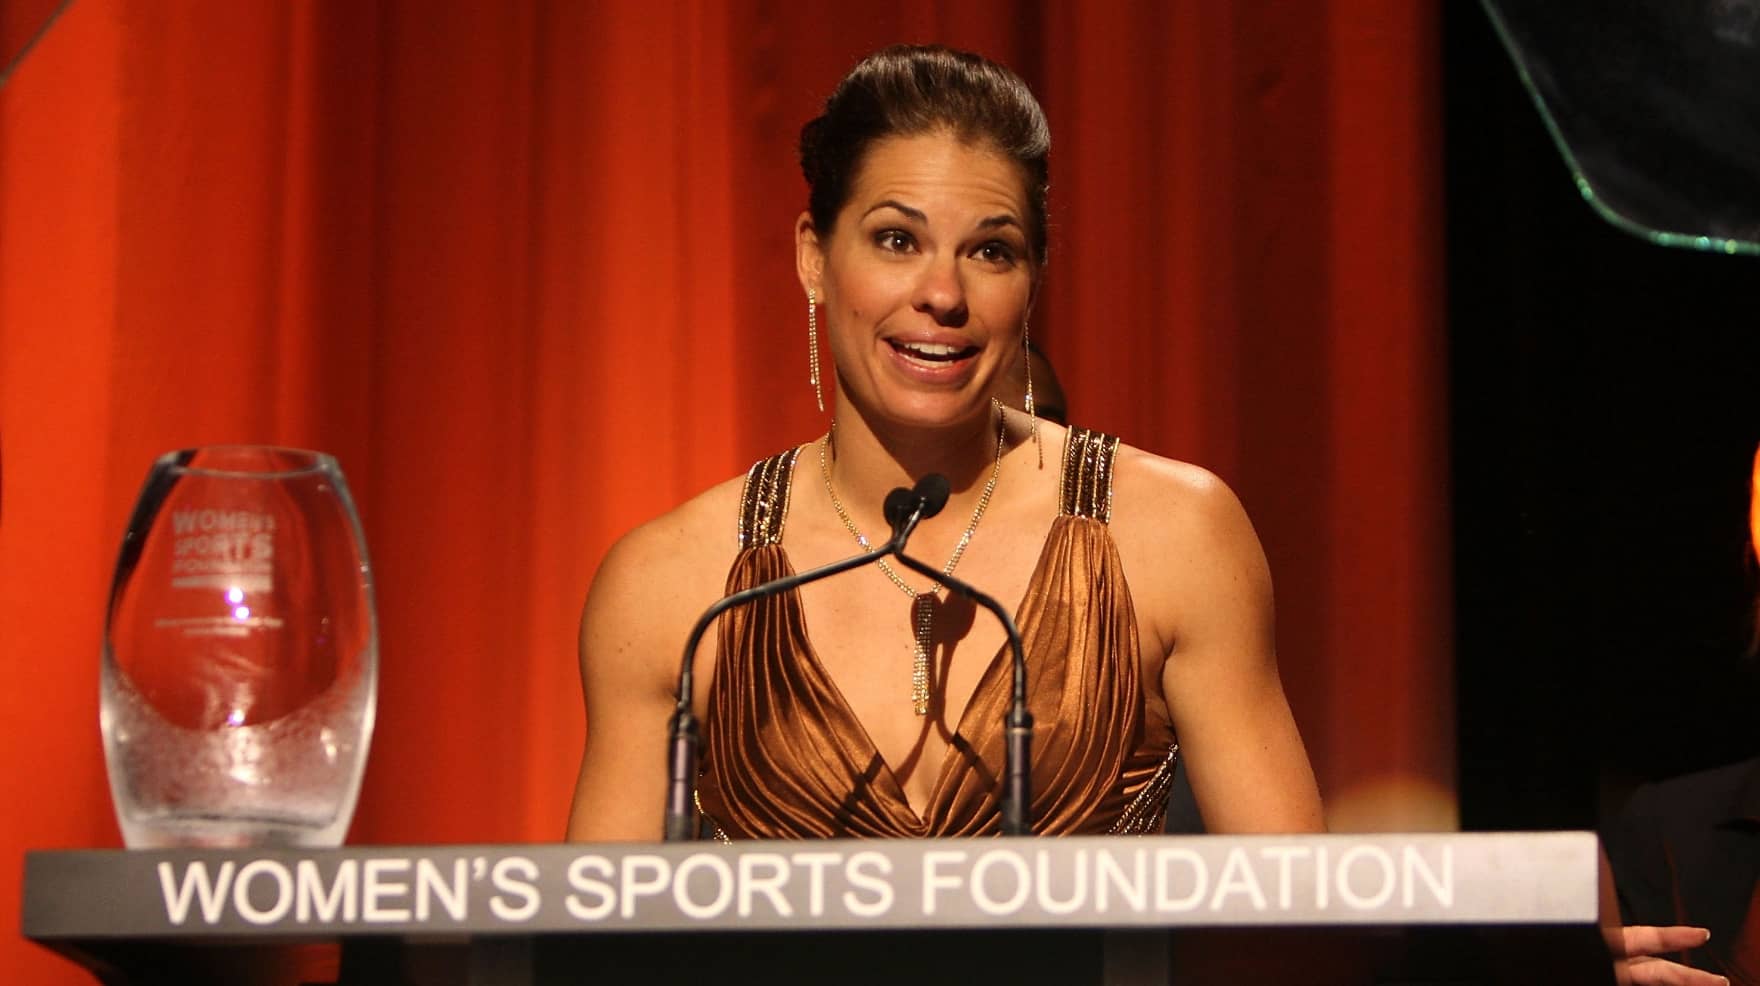 WSF Past President Jessica Mendoza speaks on stage during the 29th Annual Salute to Women in Sports presented by the Women’s Sports Foundation at The Waldorf-Astoria Hotel on October 14, 2008 in New York City. (Photo by Stephen Lovekin/Getty Images for WSF)